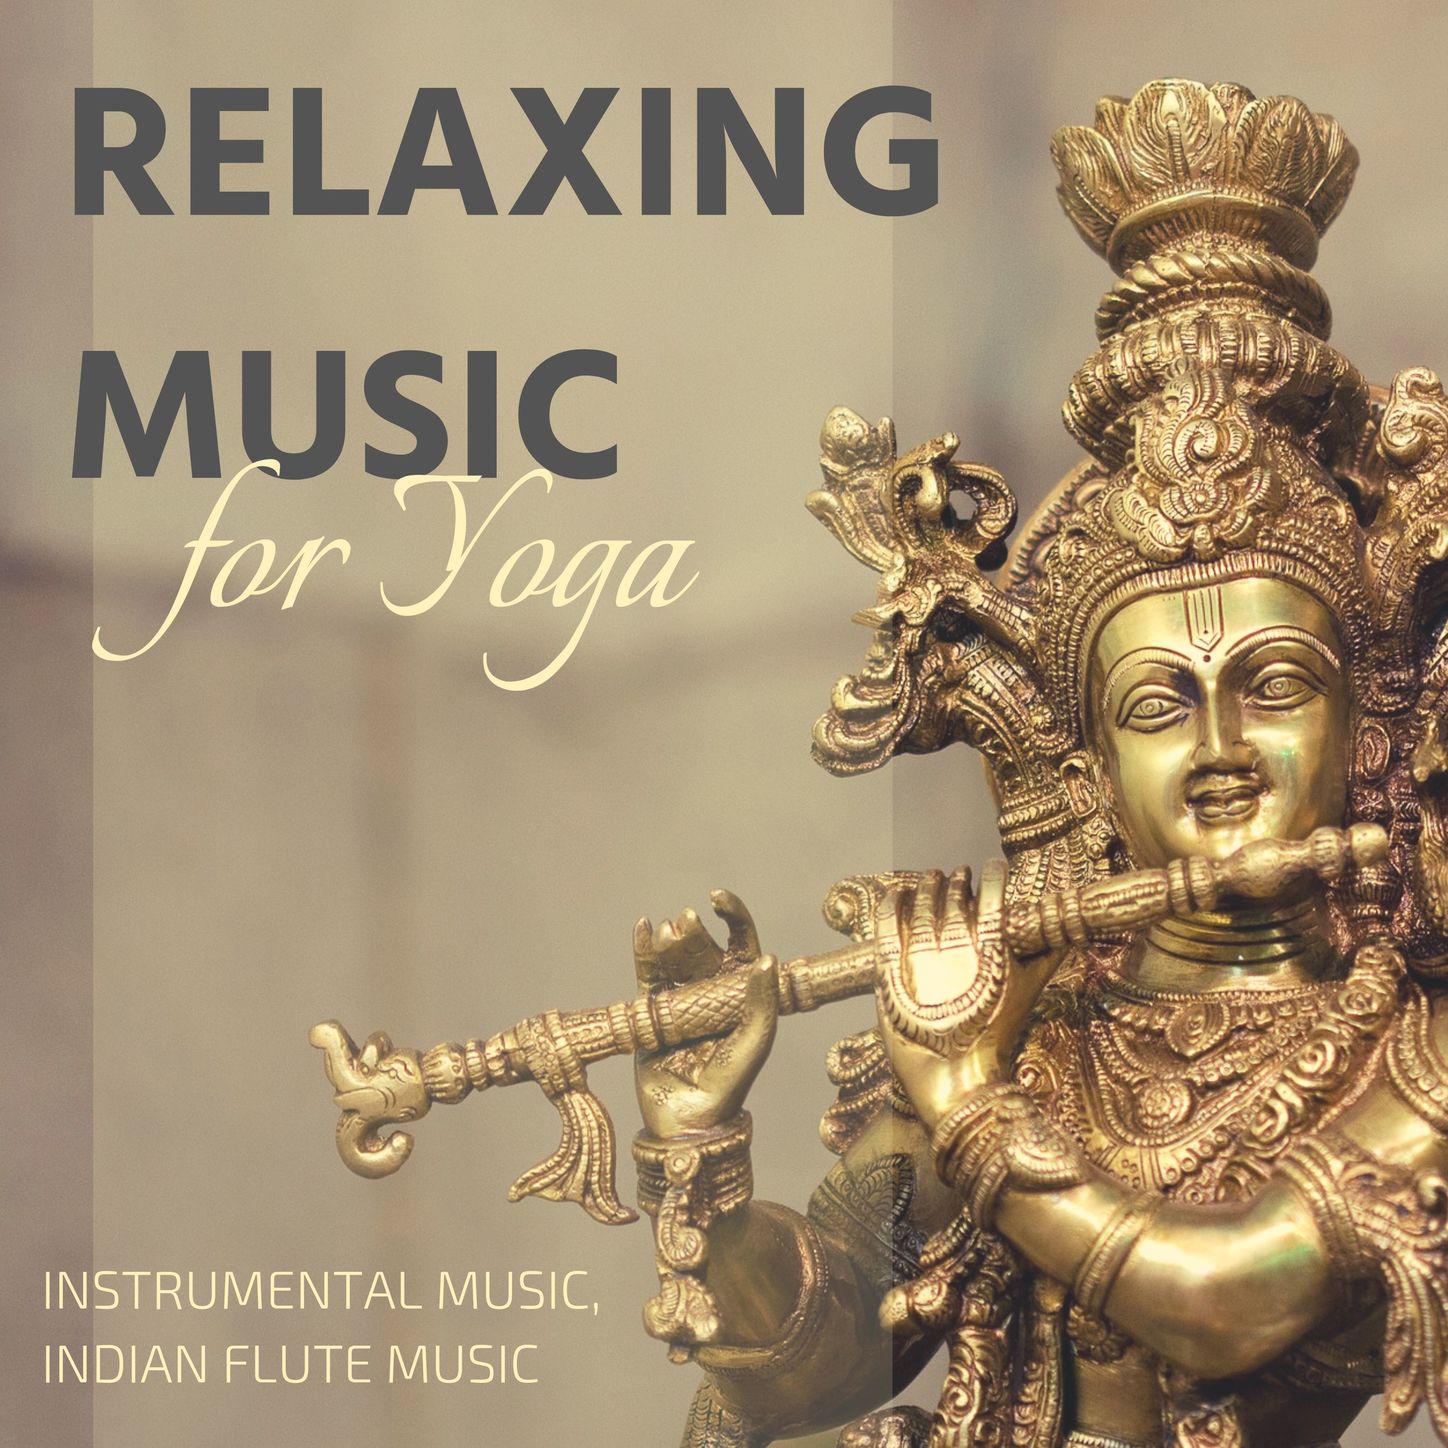 Relaxing Music for Yoga: Instrumental music, Indian Flute Music